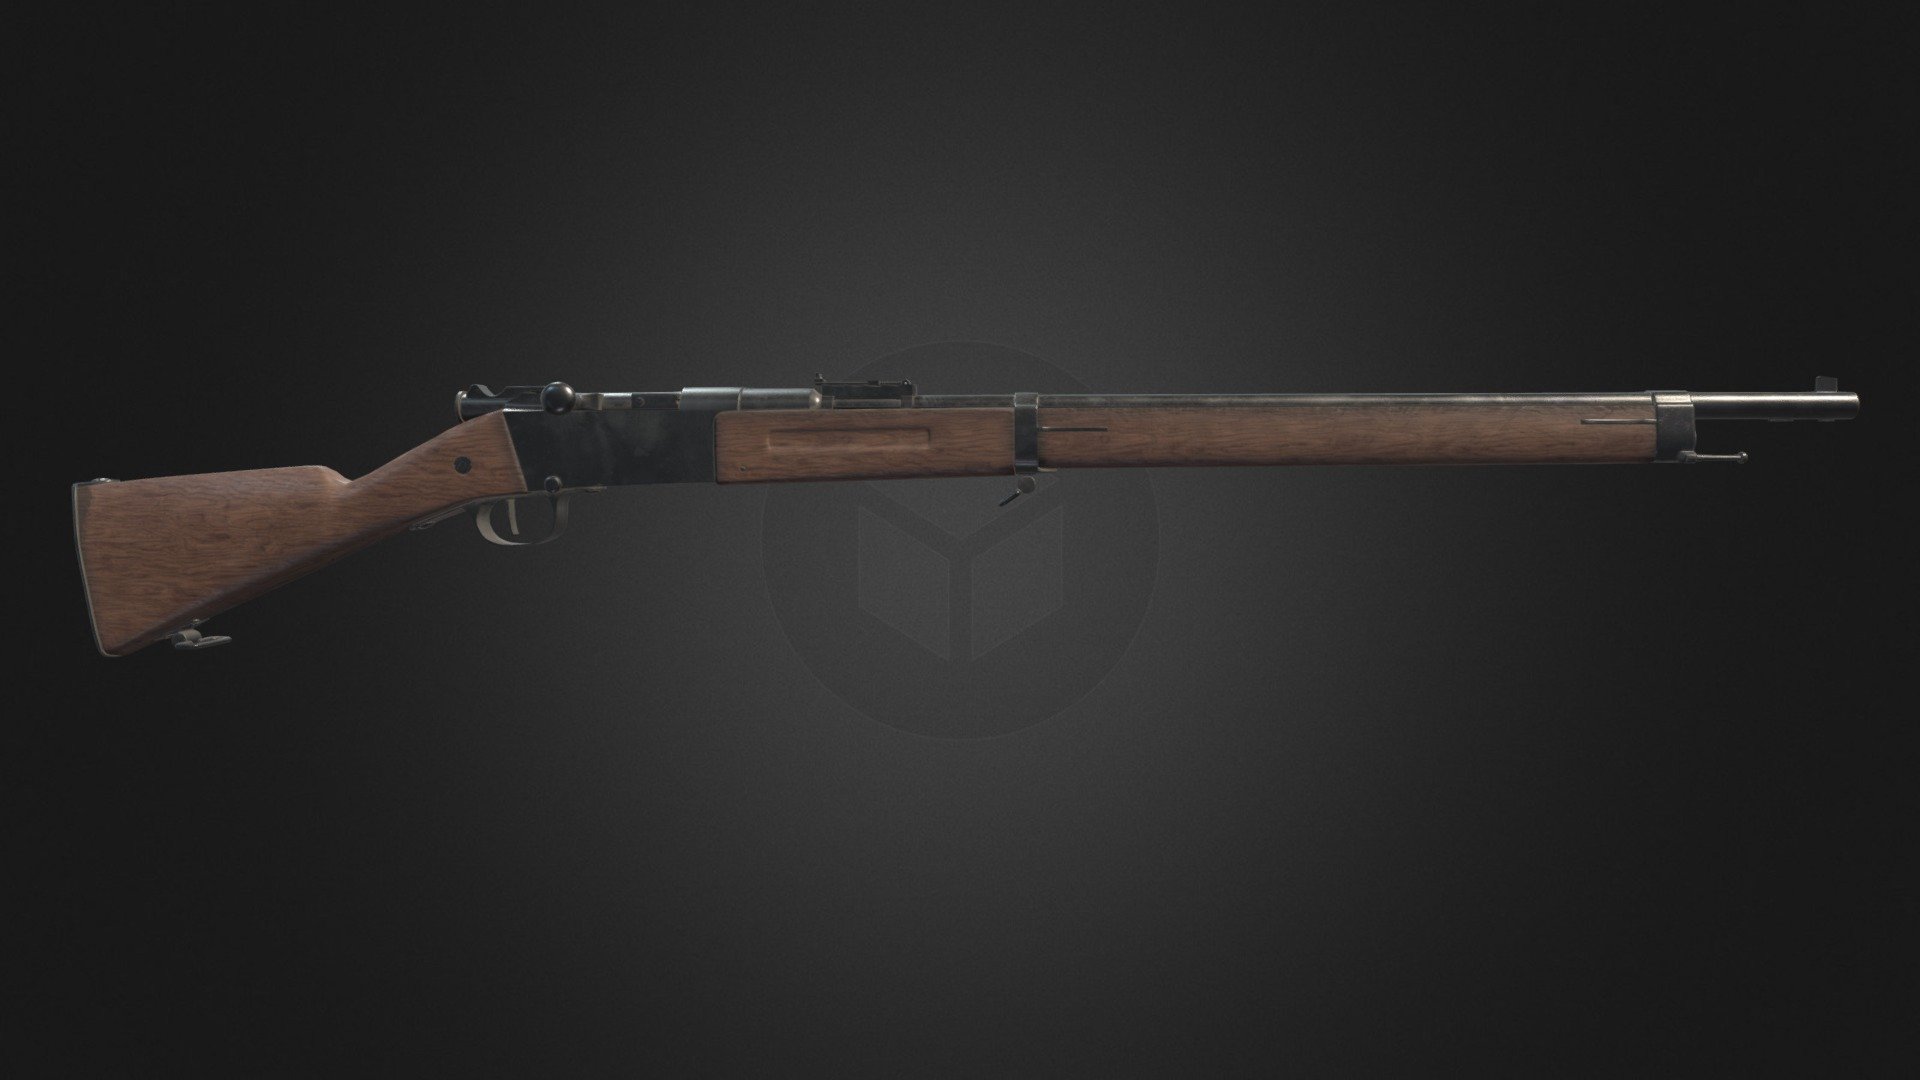 My 3D rendition of the ‘Fusil Mle 1886 M93’ French Lebel bolt-action rifle 3d model